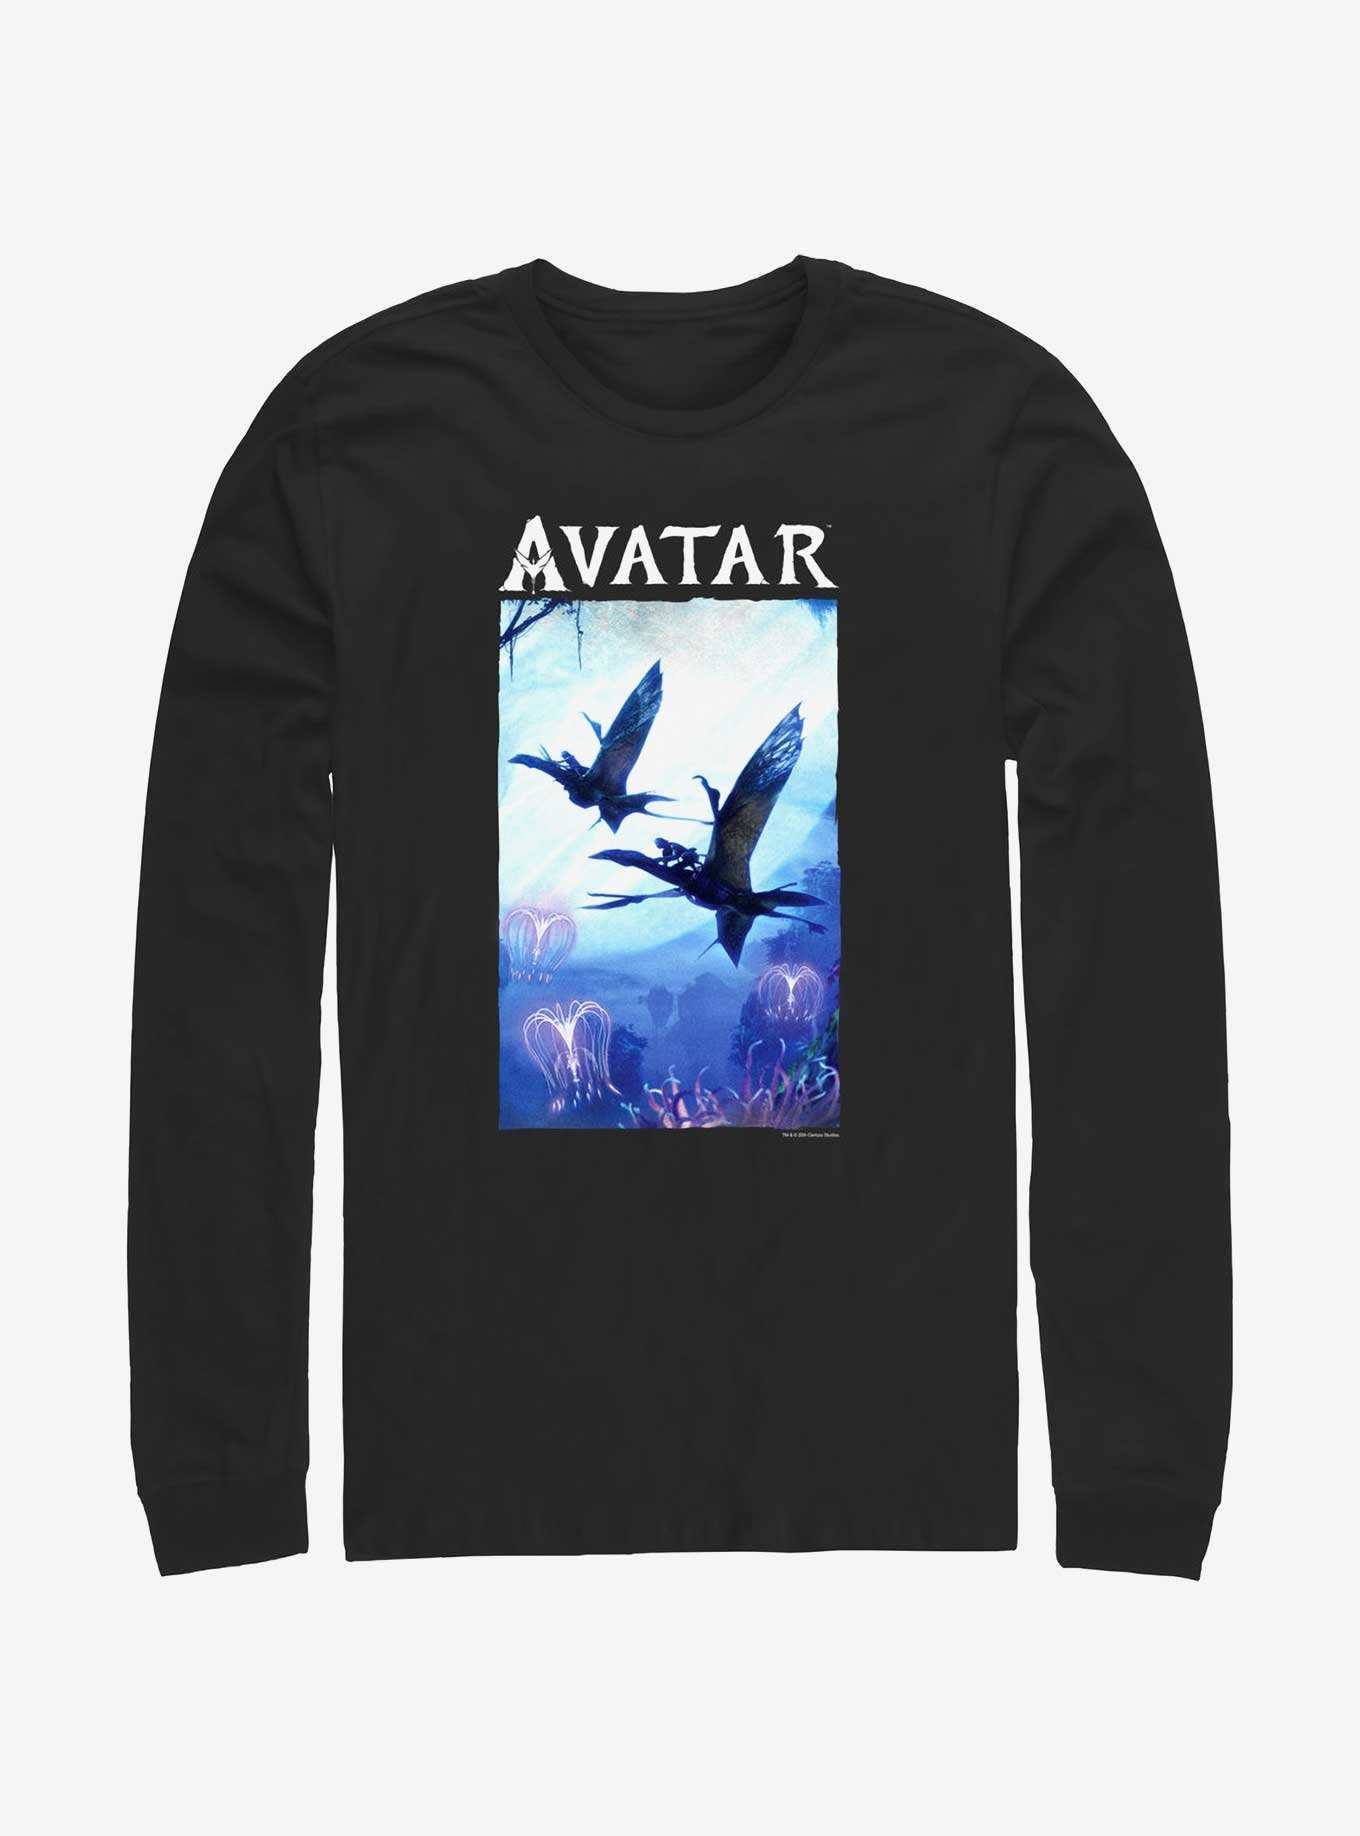 Avatar: The Way of Water Air Time Poster Long-Sleeve T-Shirt, , hi-res